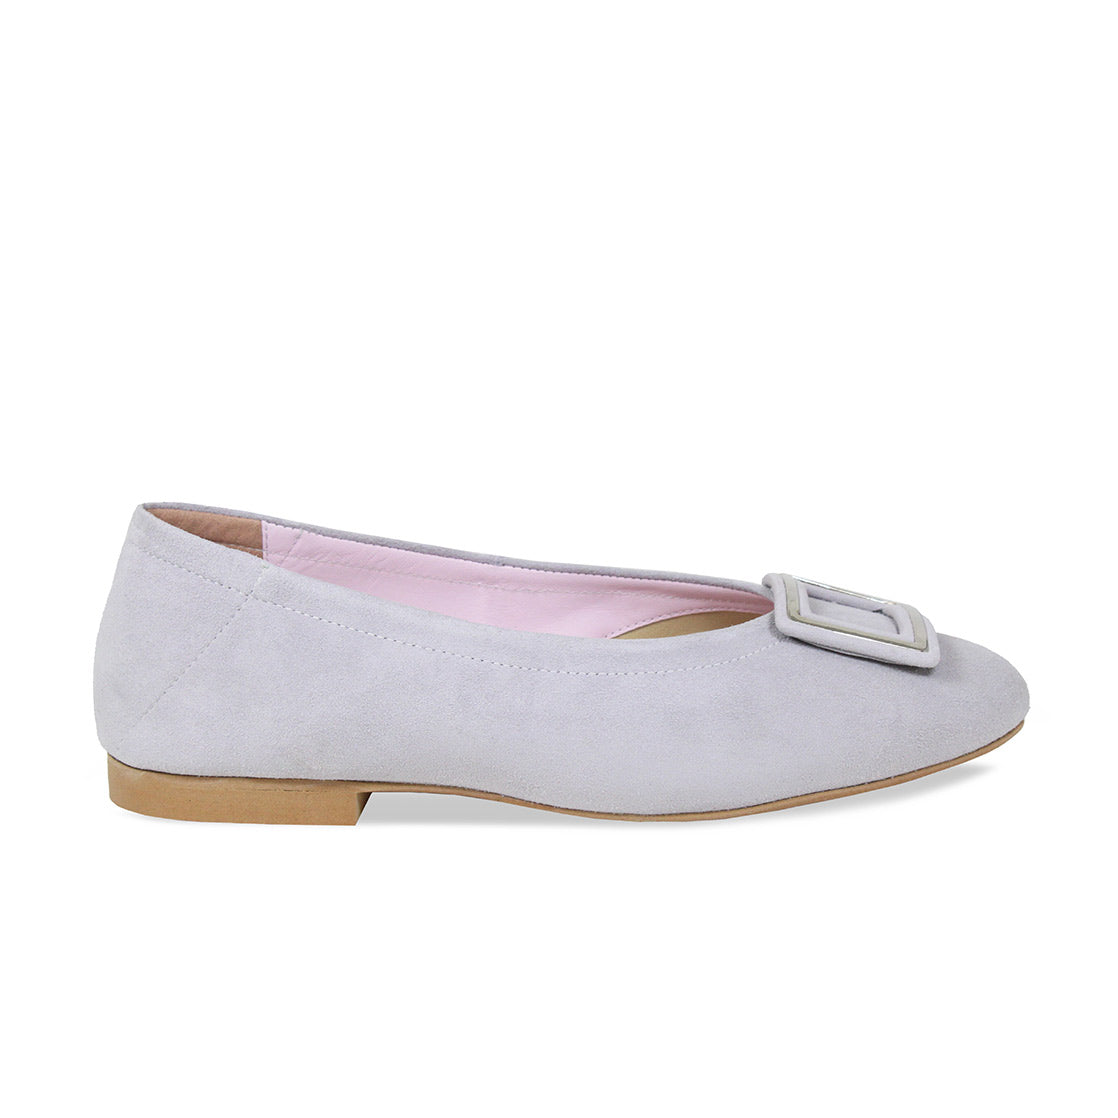 Lizzie: Pale Grey Suede – Fashionable Flats for Bunions | Sole Bliss